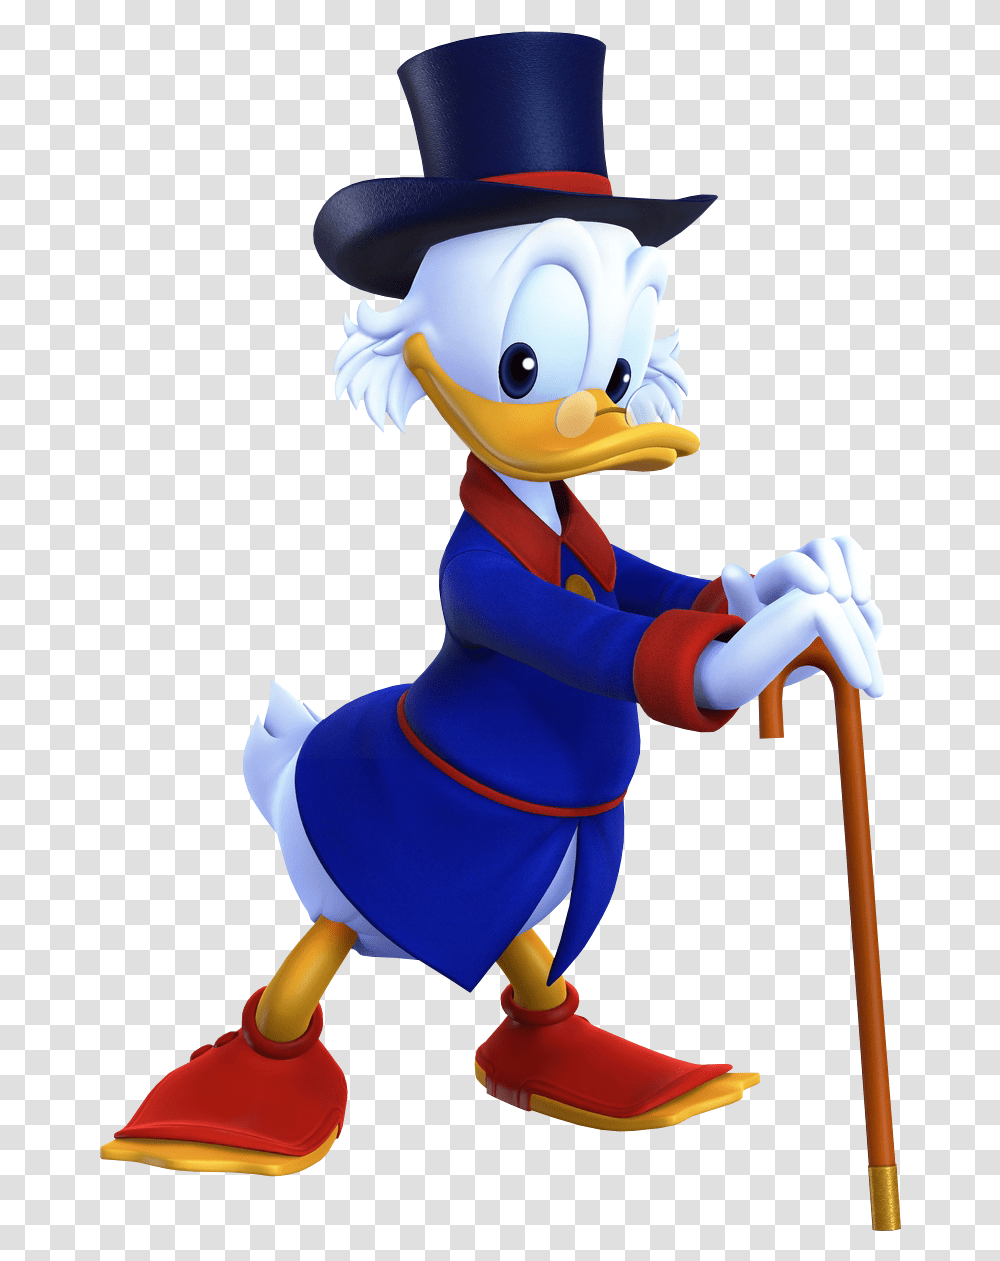 Scrooge Mcduck Scrooge Mcduck Kingdom Hearts, Toy, Mascot, Stick, Figurine Transparent Png